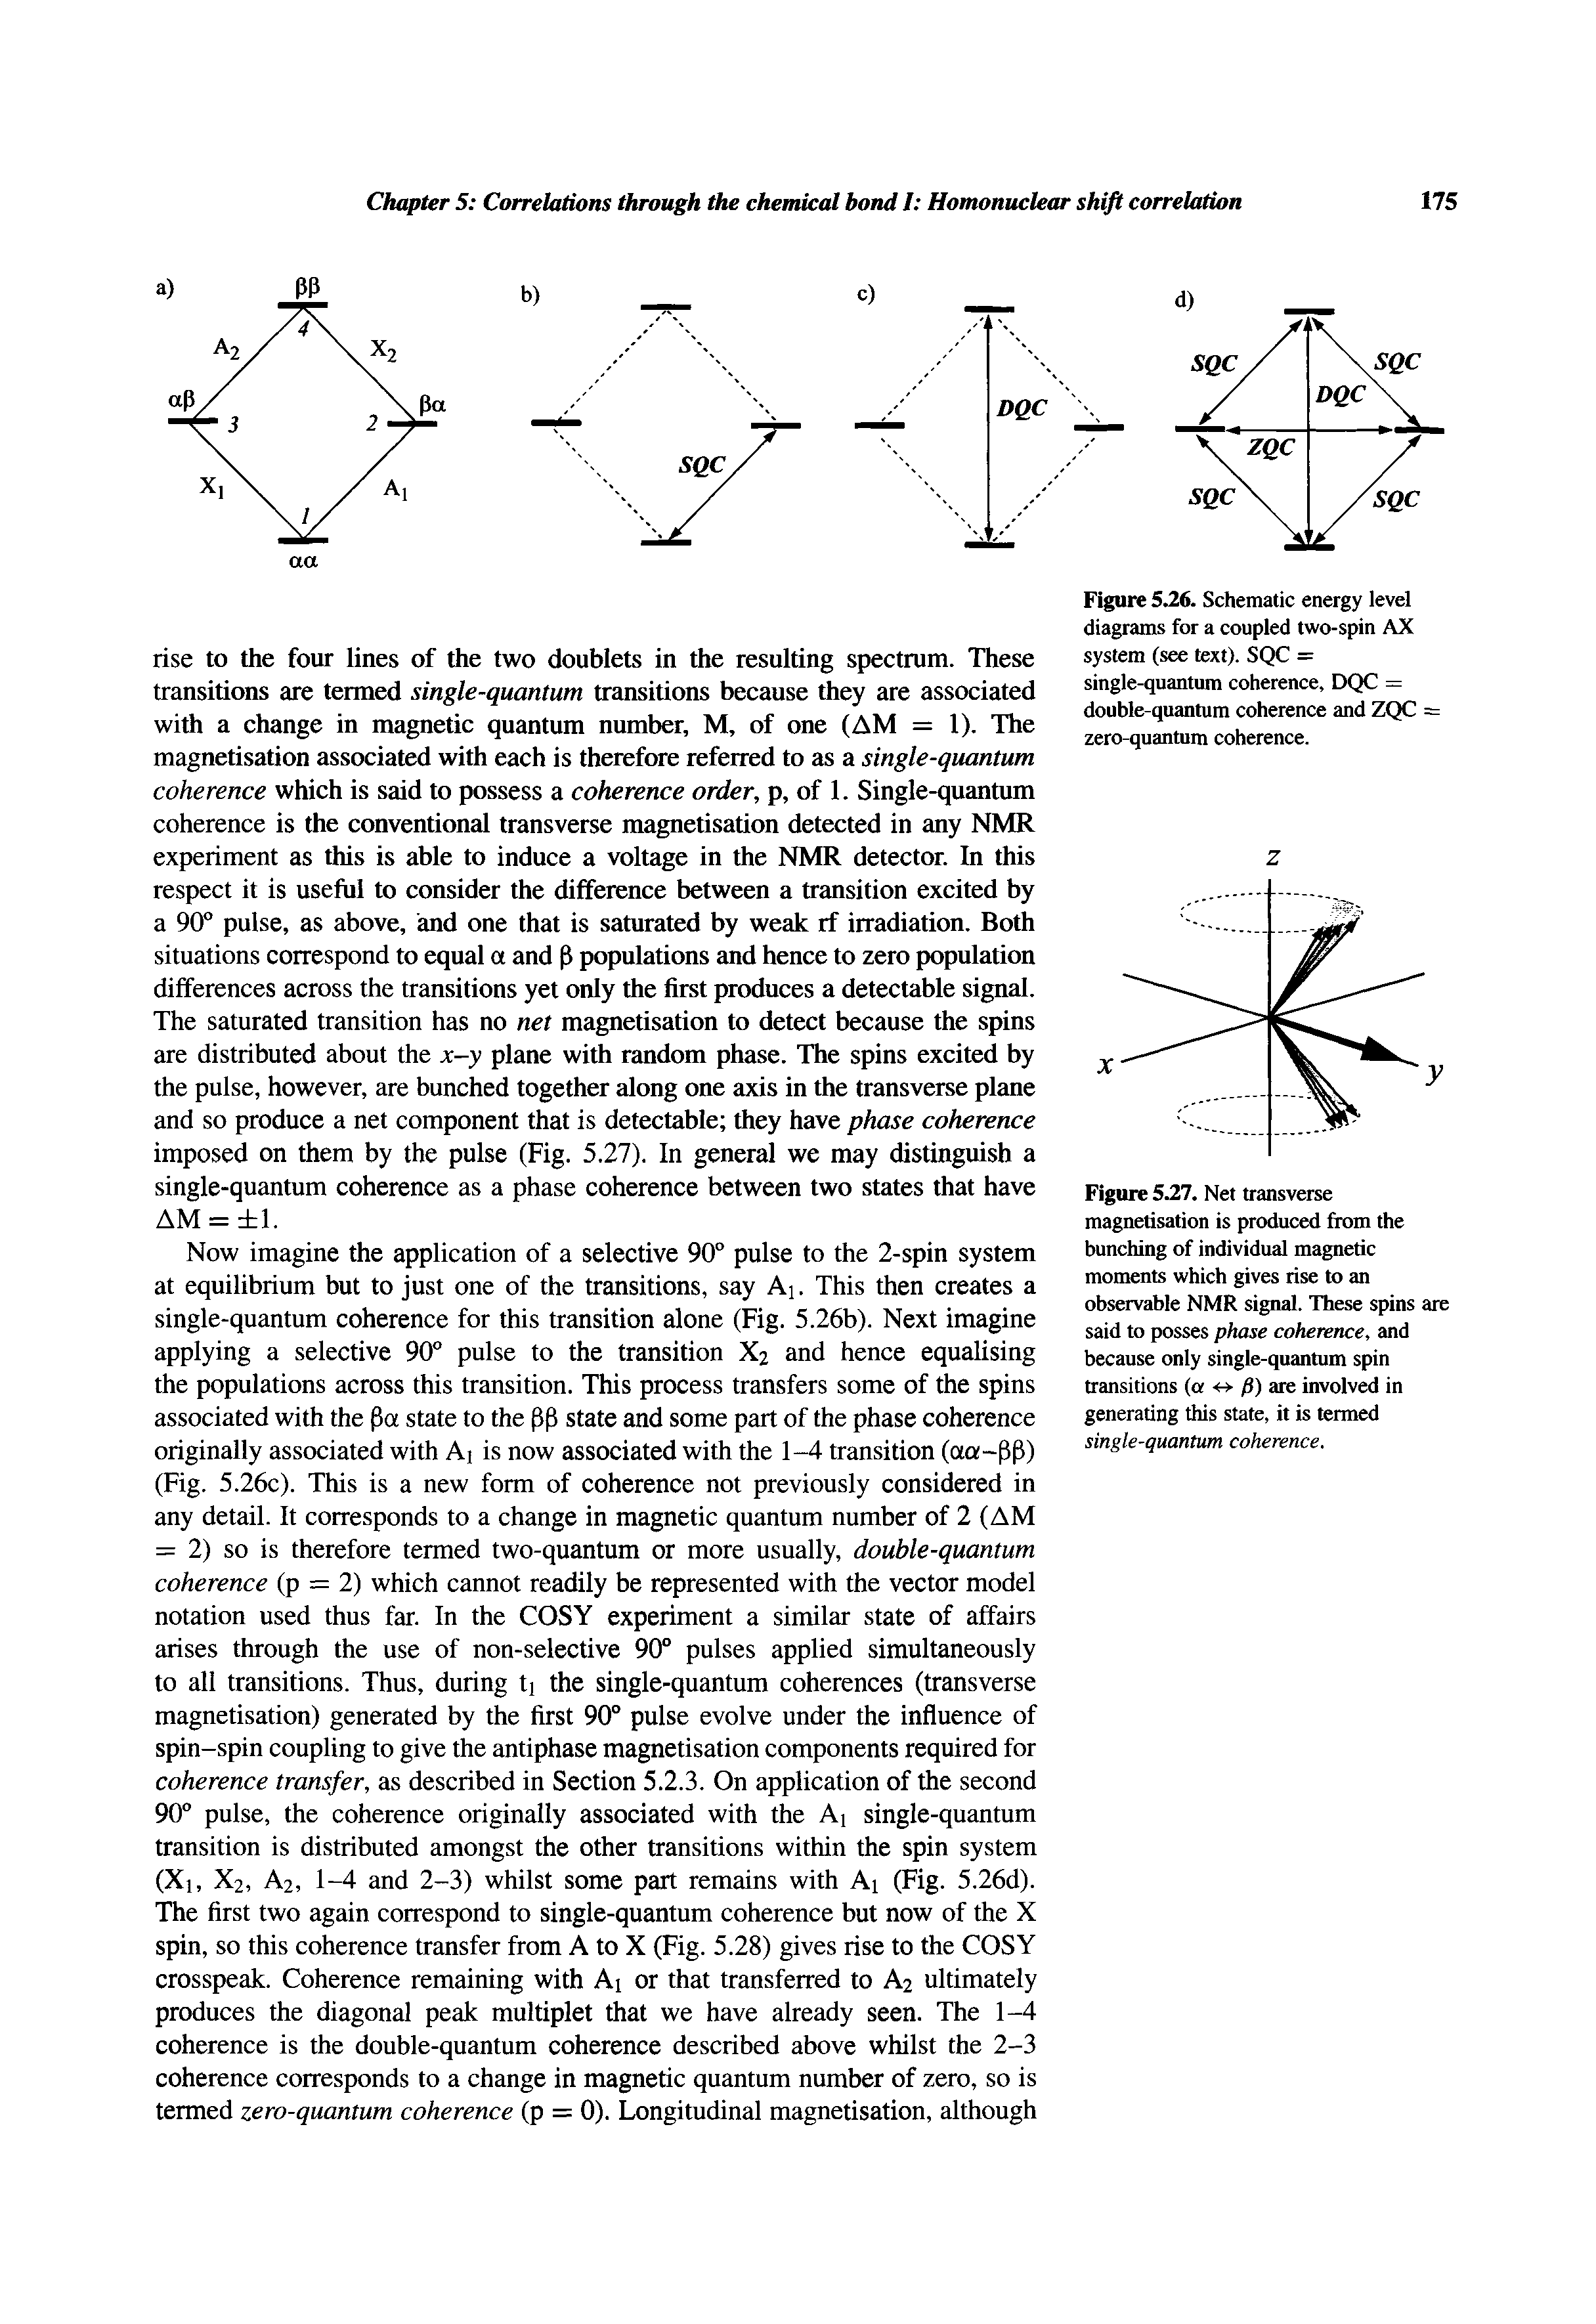 Figure 5A6. Schematic energy level diagrams for a coupled two-spin AX system (see text). SQC = single-quantum coherence, DQC = double-quantum coherence and ZQC zero-quantum coherence.